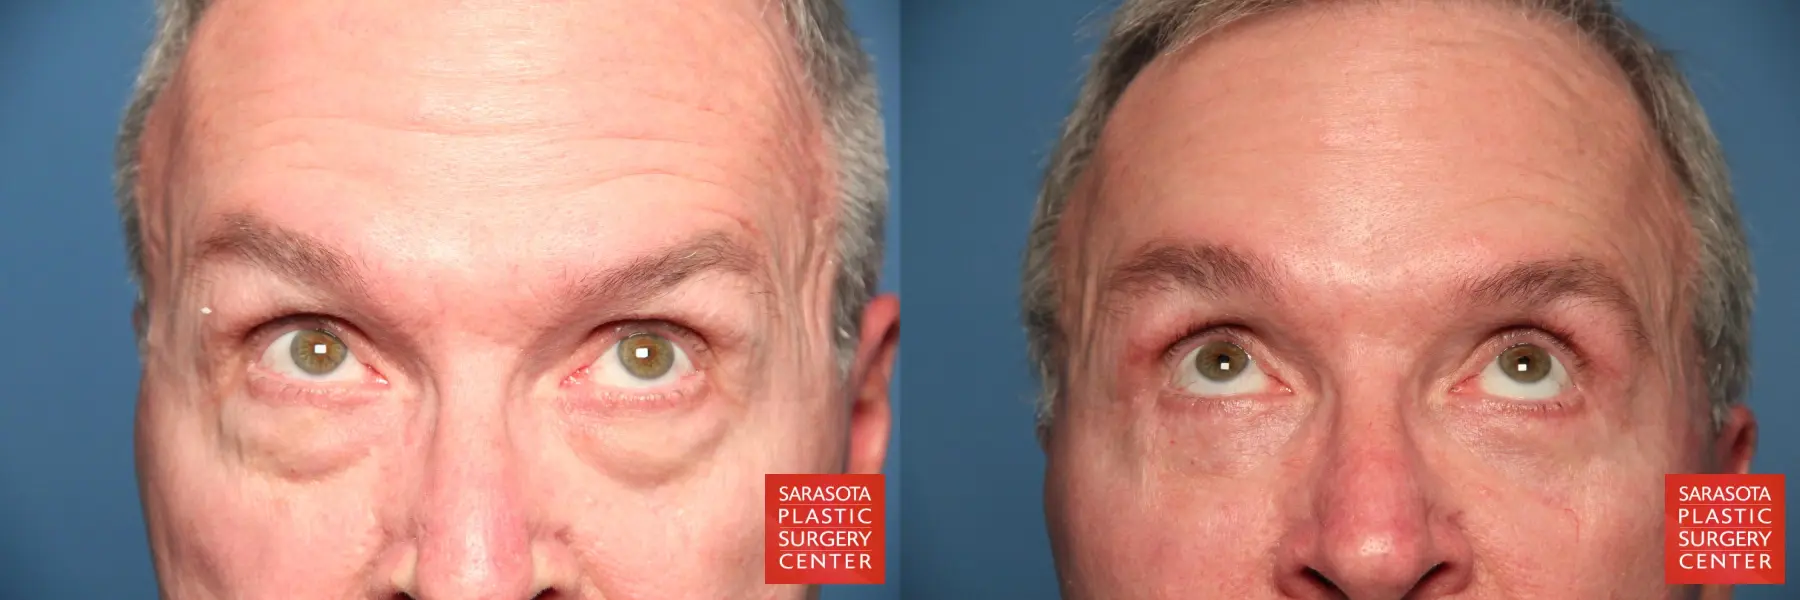 Eyelid Lift For Men: Patient 2 - Before and After 2